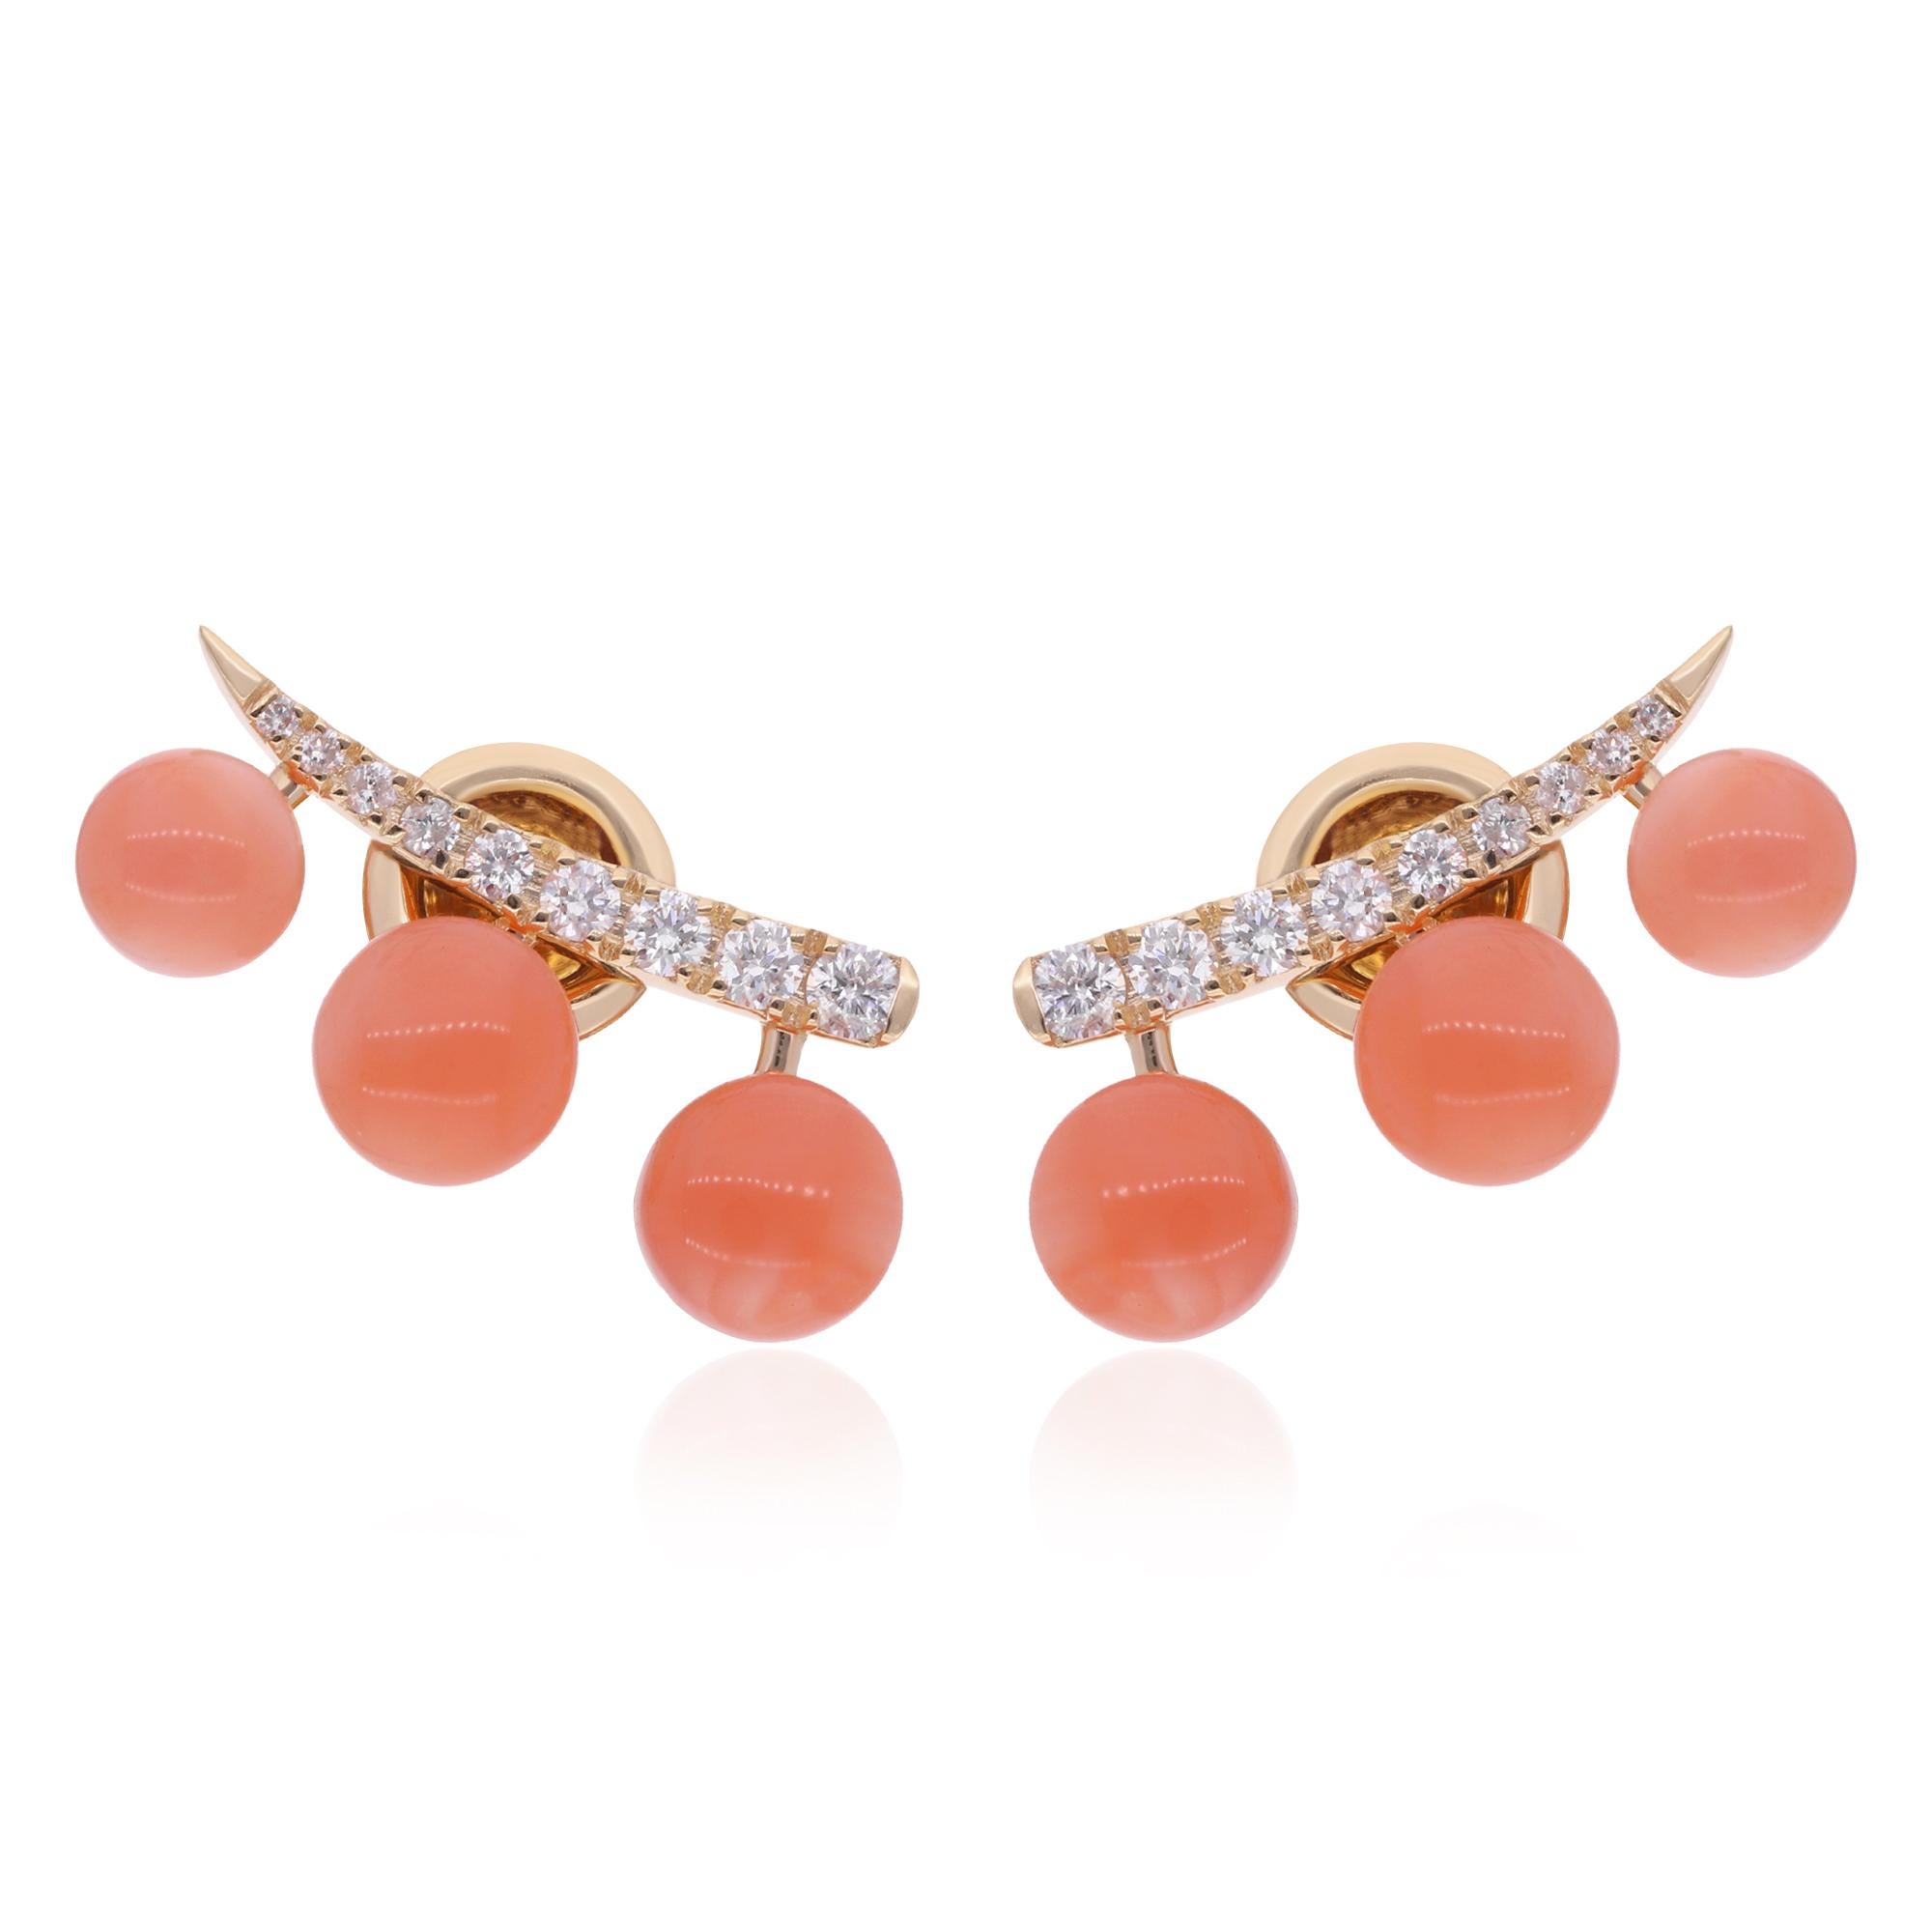 Adorning the Coral gemstones are shimmering Diamonds, meticulously set to add a touch of glamour and sparkle to the earrings. Each diamond is carefully chosen for its exceptional clarity and brilliance, ensuring that the earrings radiate with